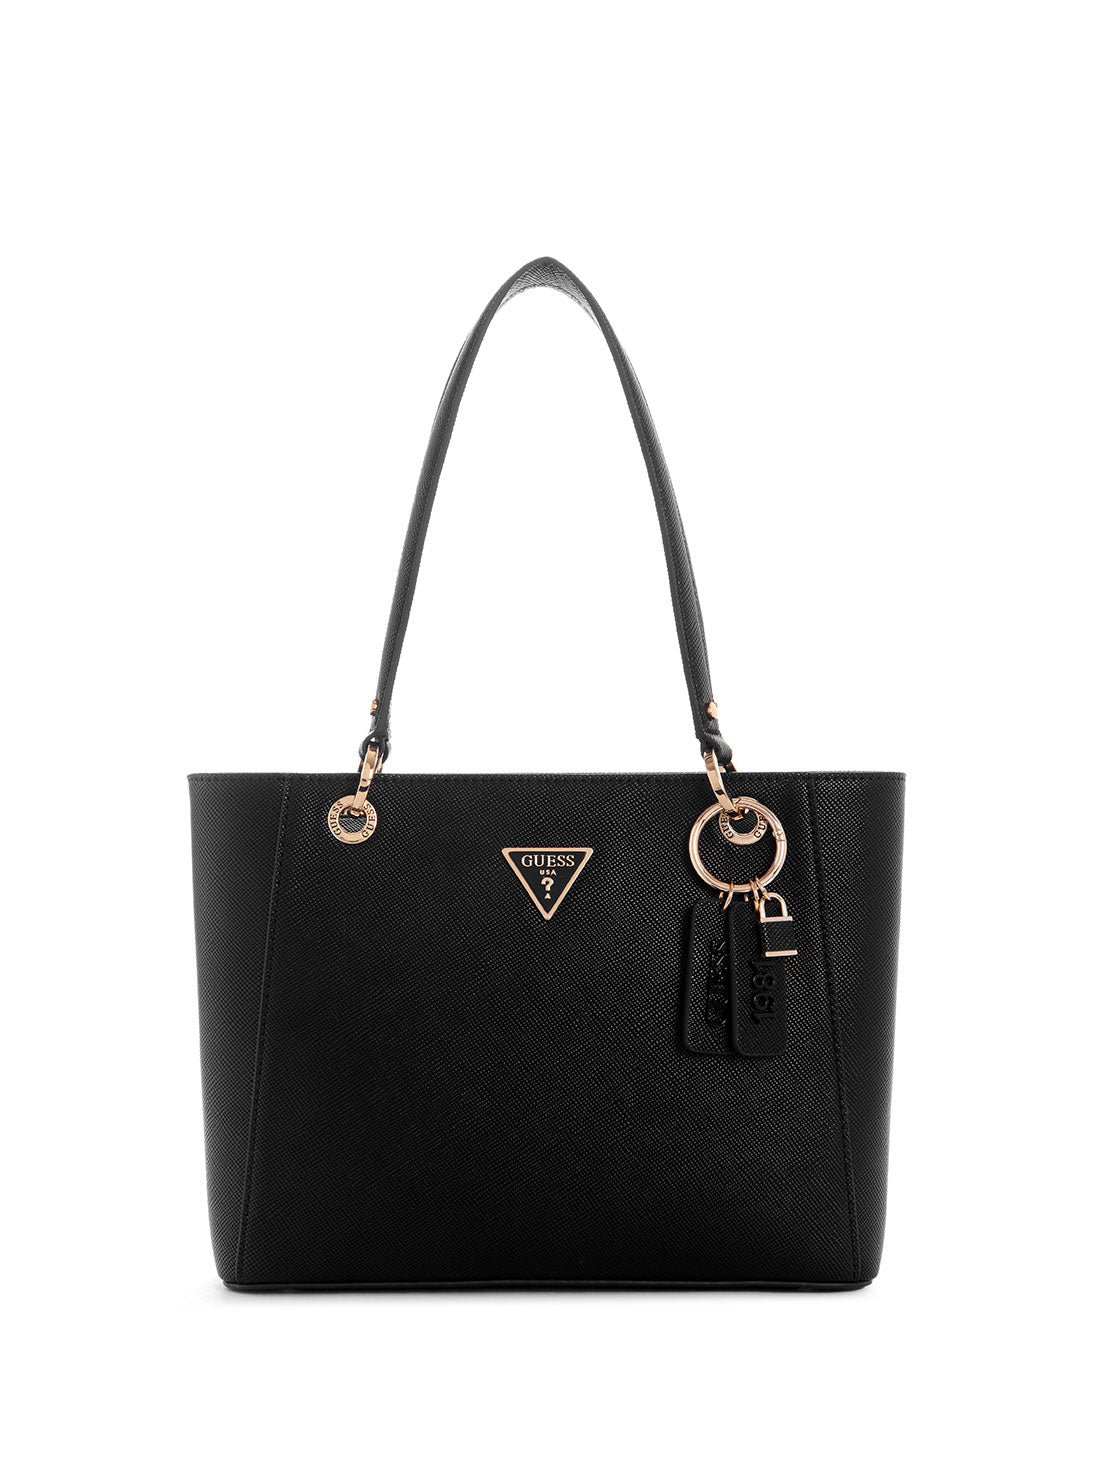 GUESS Women's Black Noelle Small Noel Tote Bag ZG787924 Front View